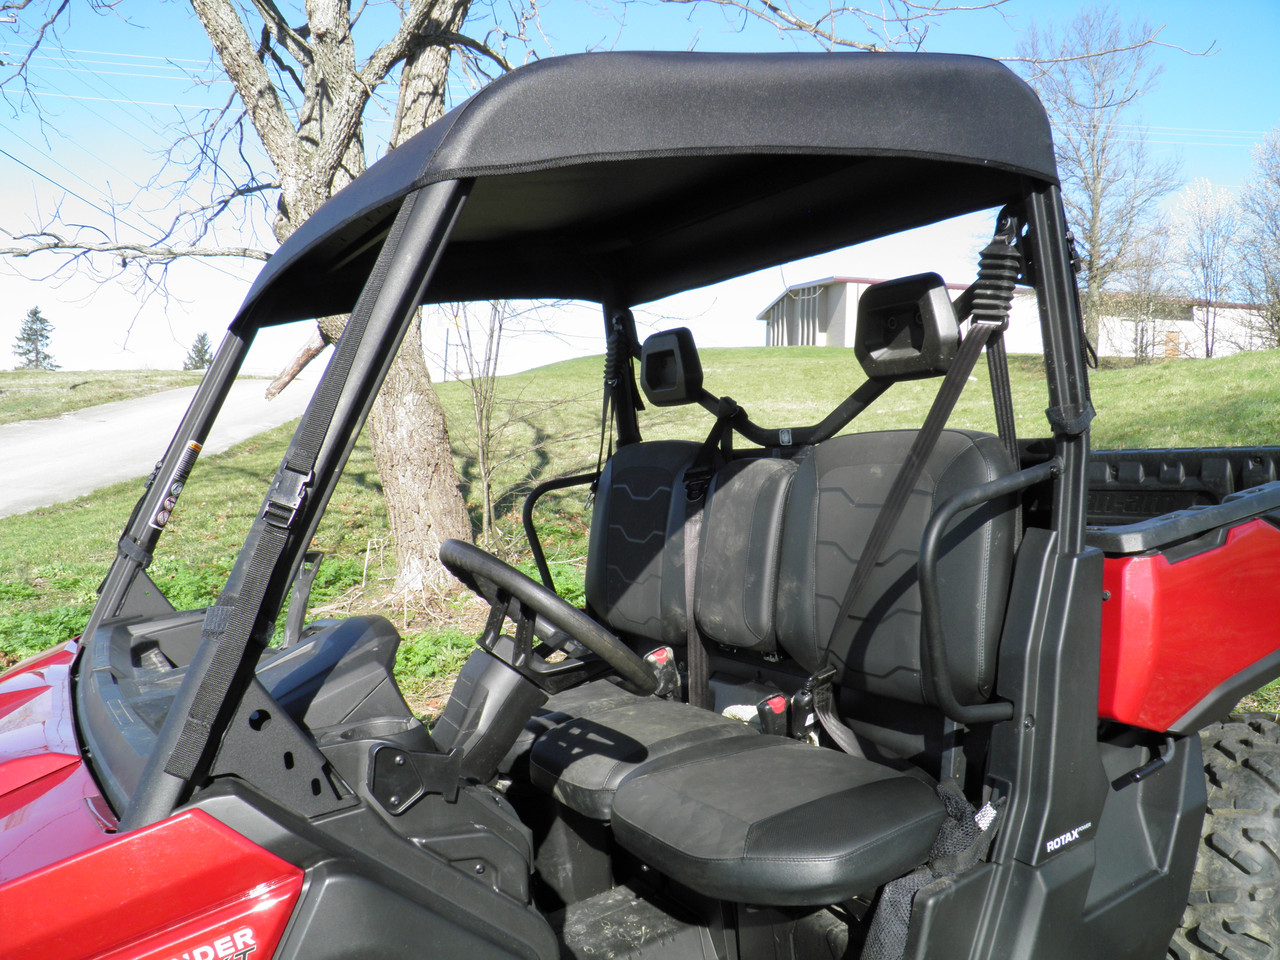 3 Star side x side can-am defender roof side view